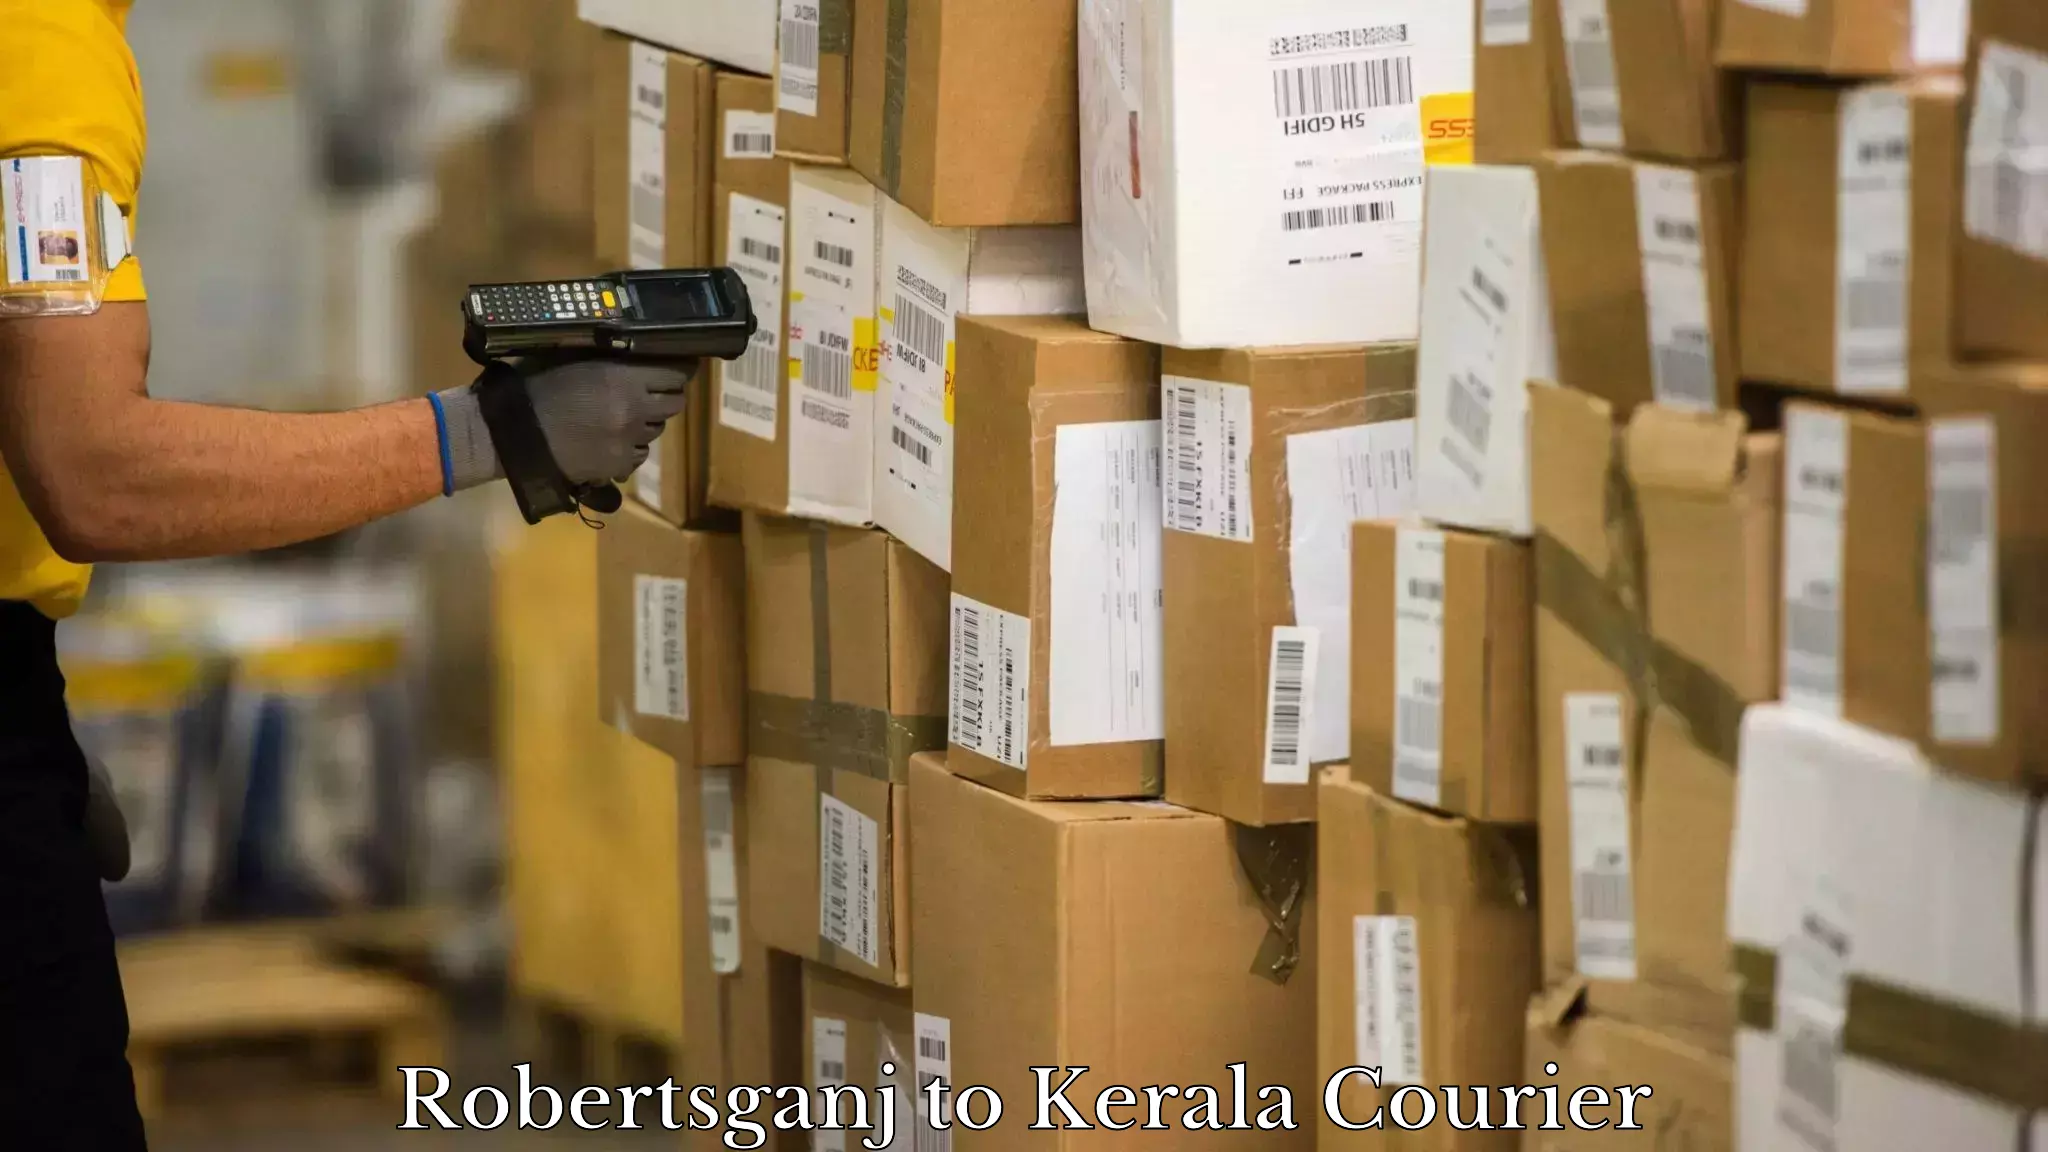 Express delivery network Robertsganj to Kerala